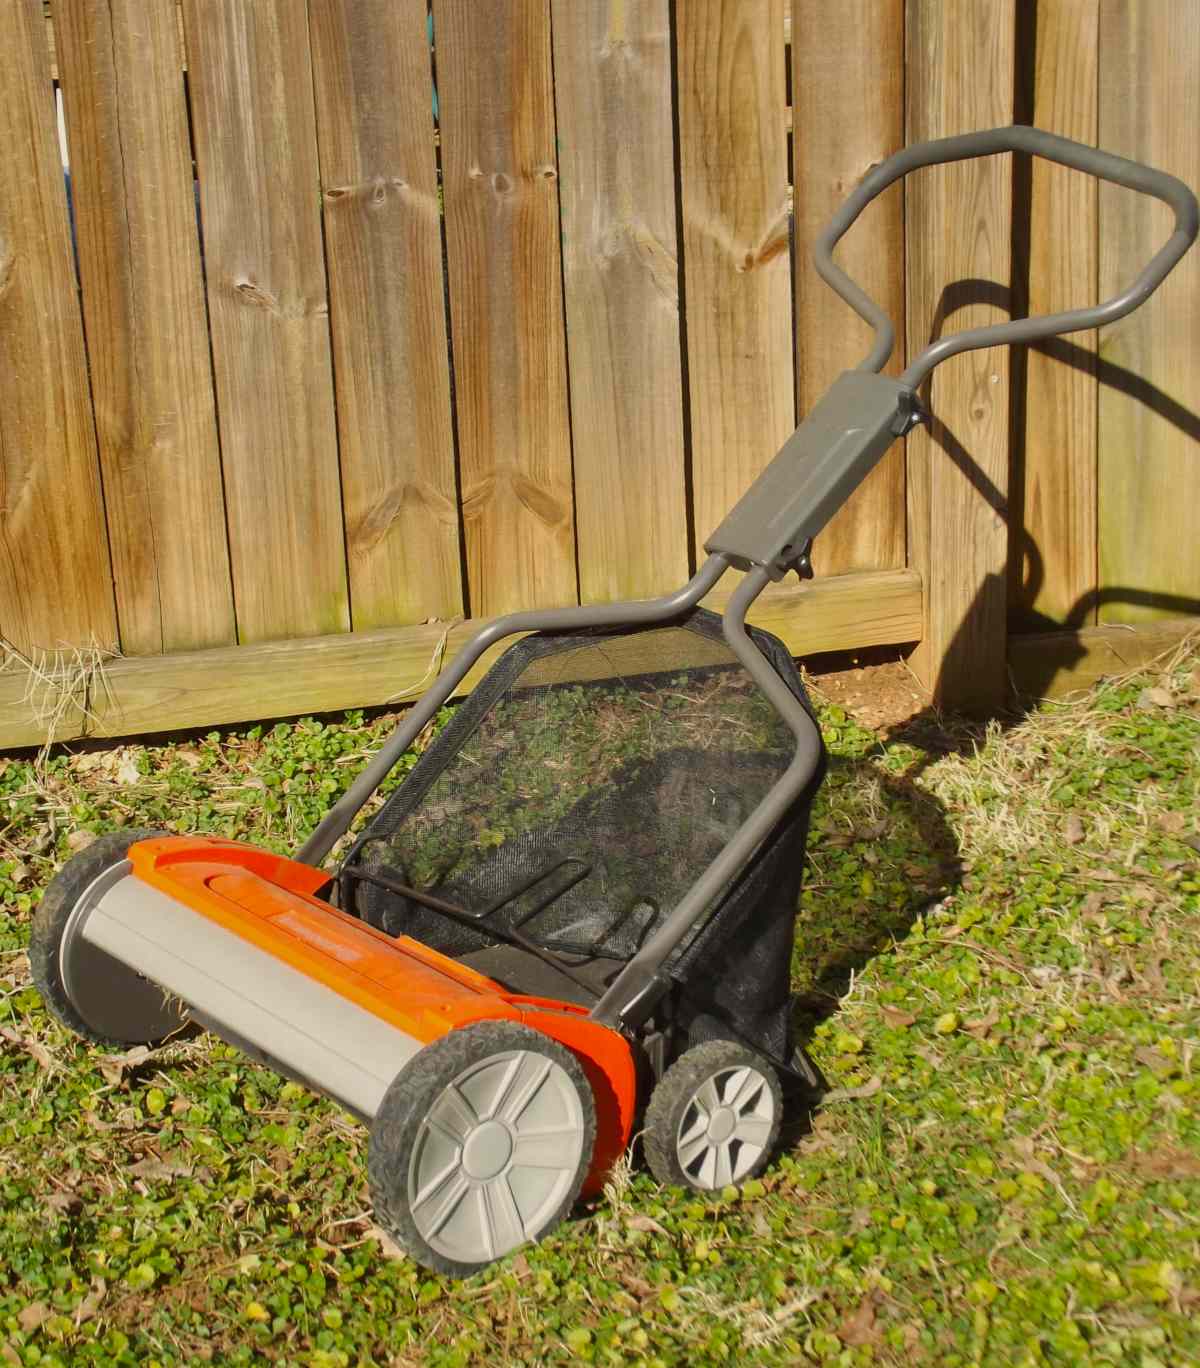 Manual lawn mowers and robots, great for small lawns